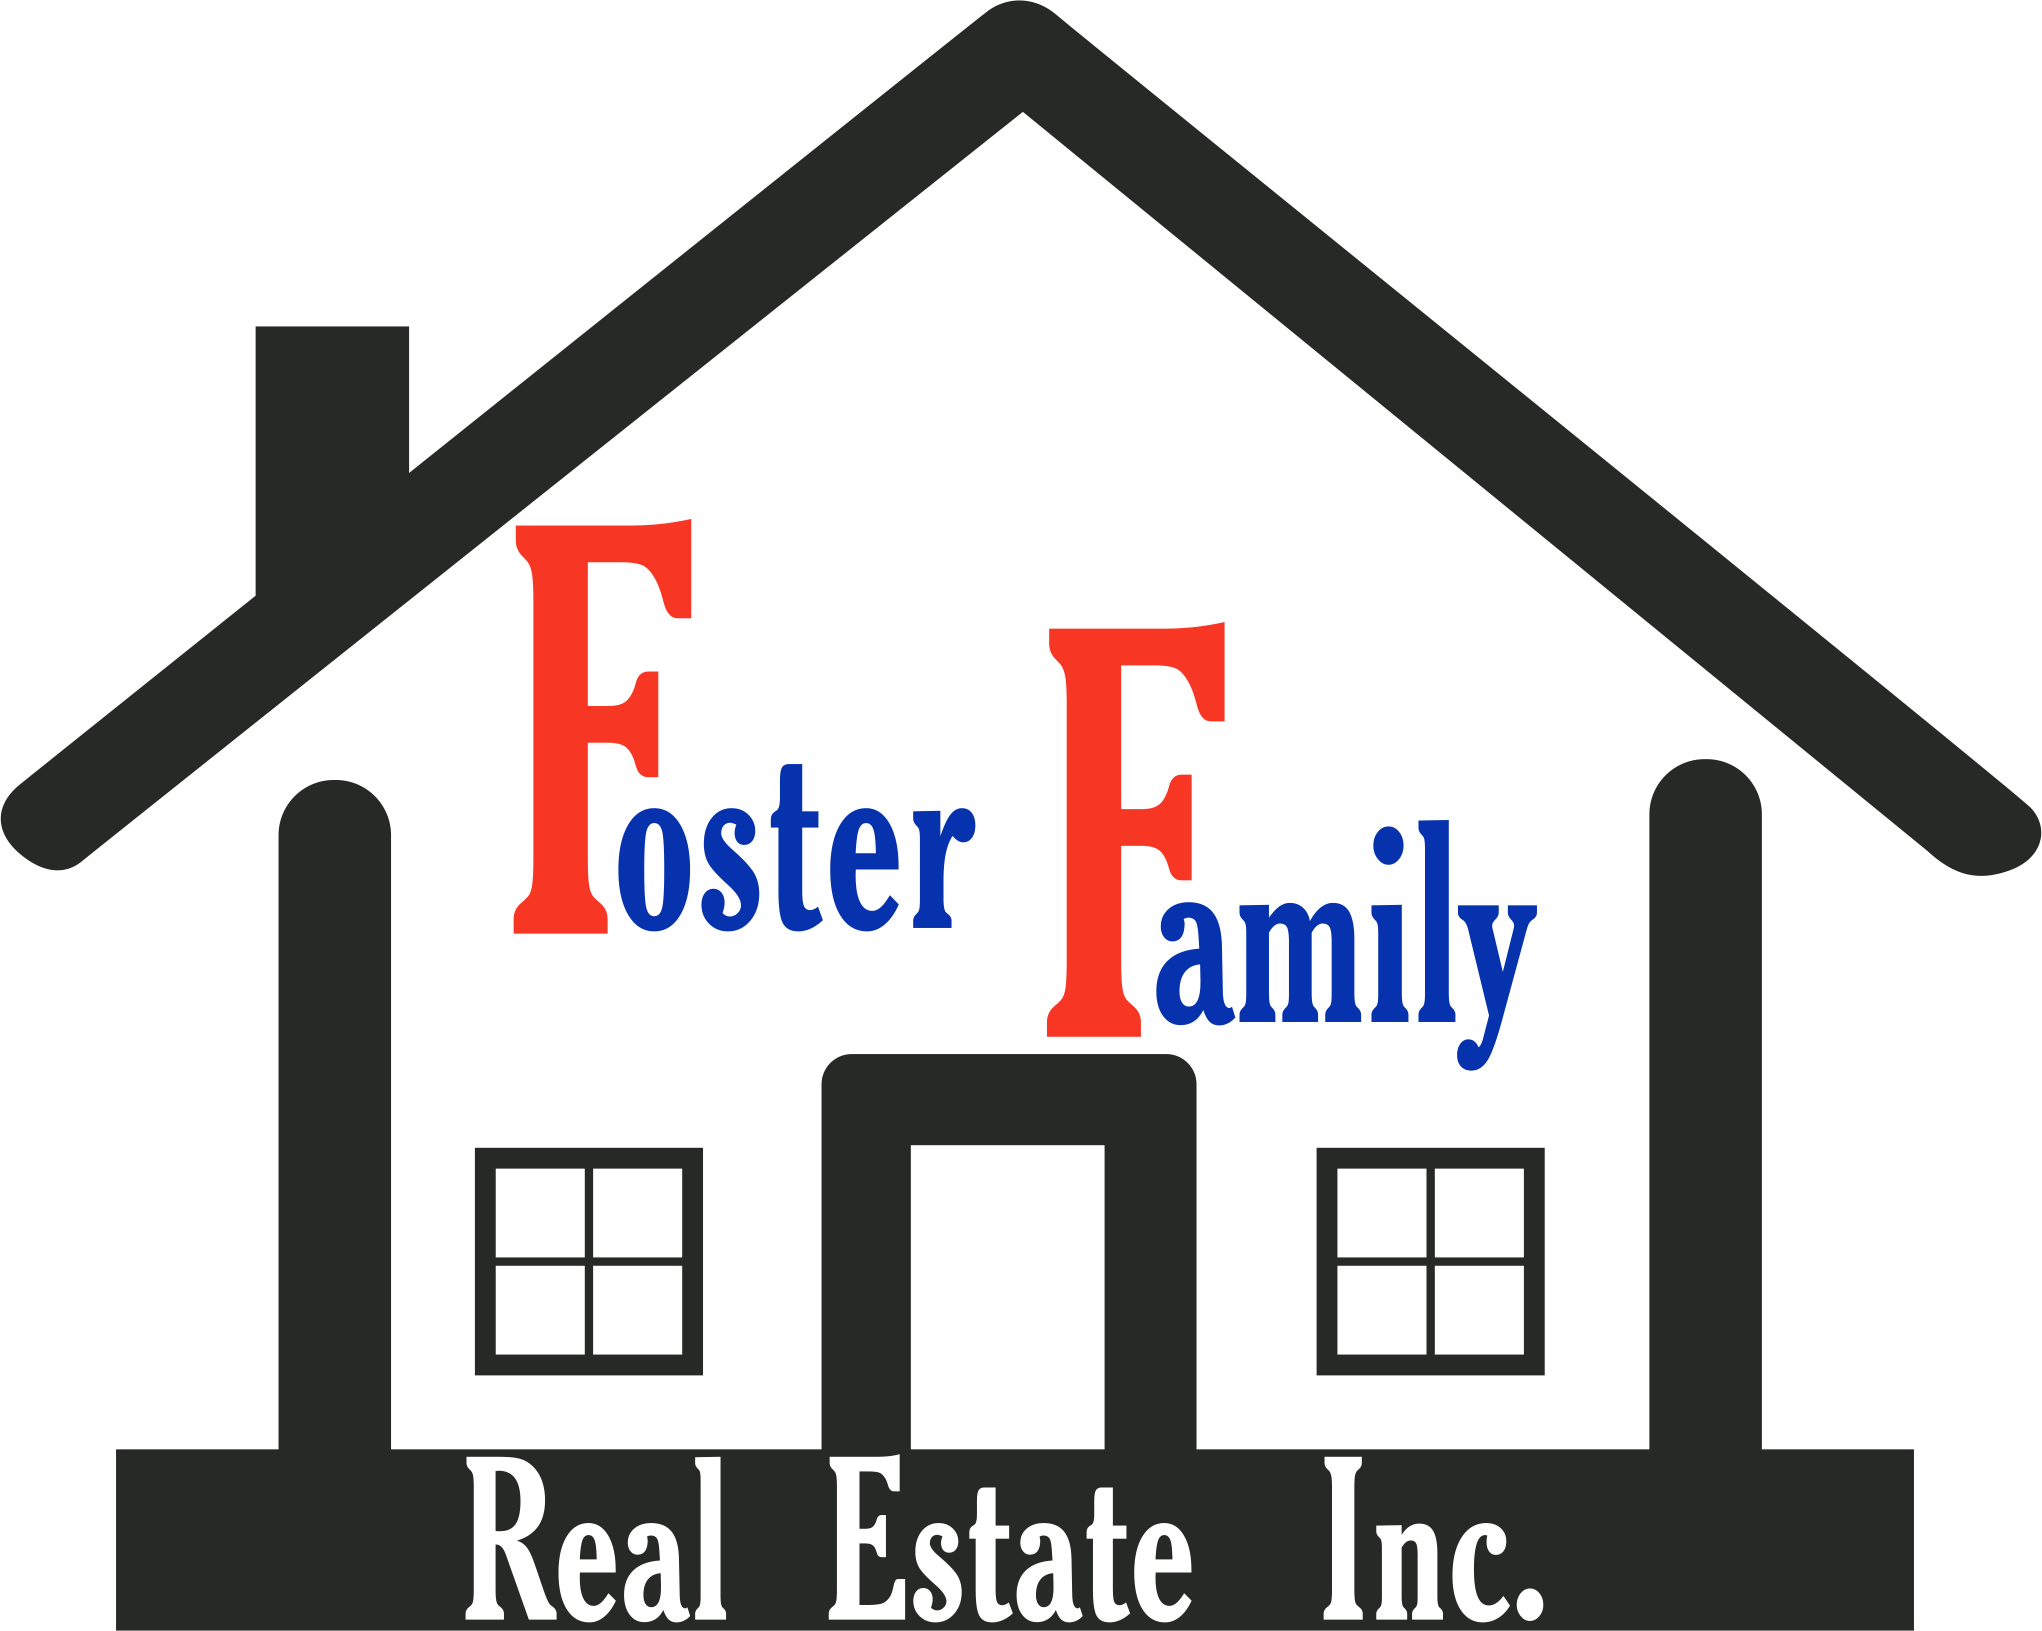 Foster Family Real Estate Specializes In Adkins Tx - Foster Family Real Estate Specializes In Adkins Tx (2042x1631)